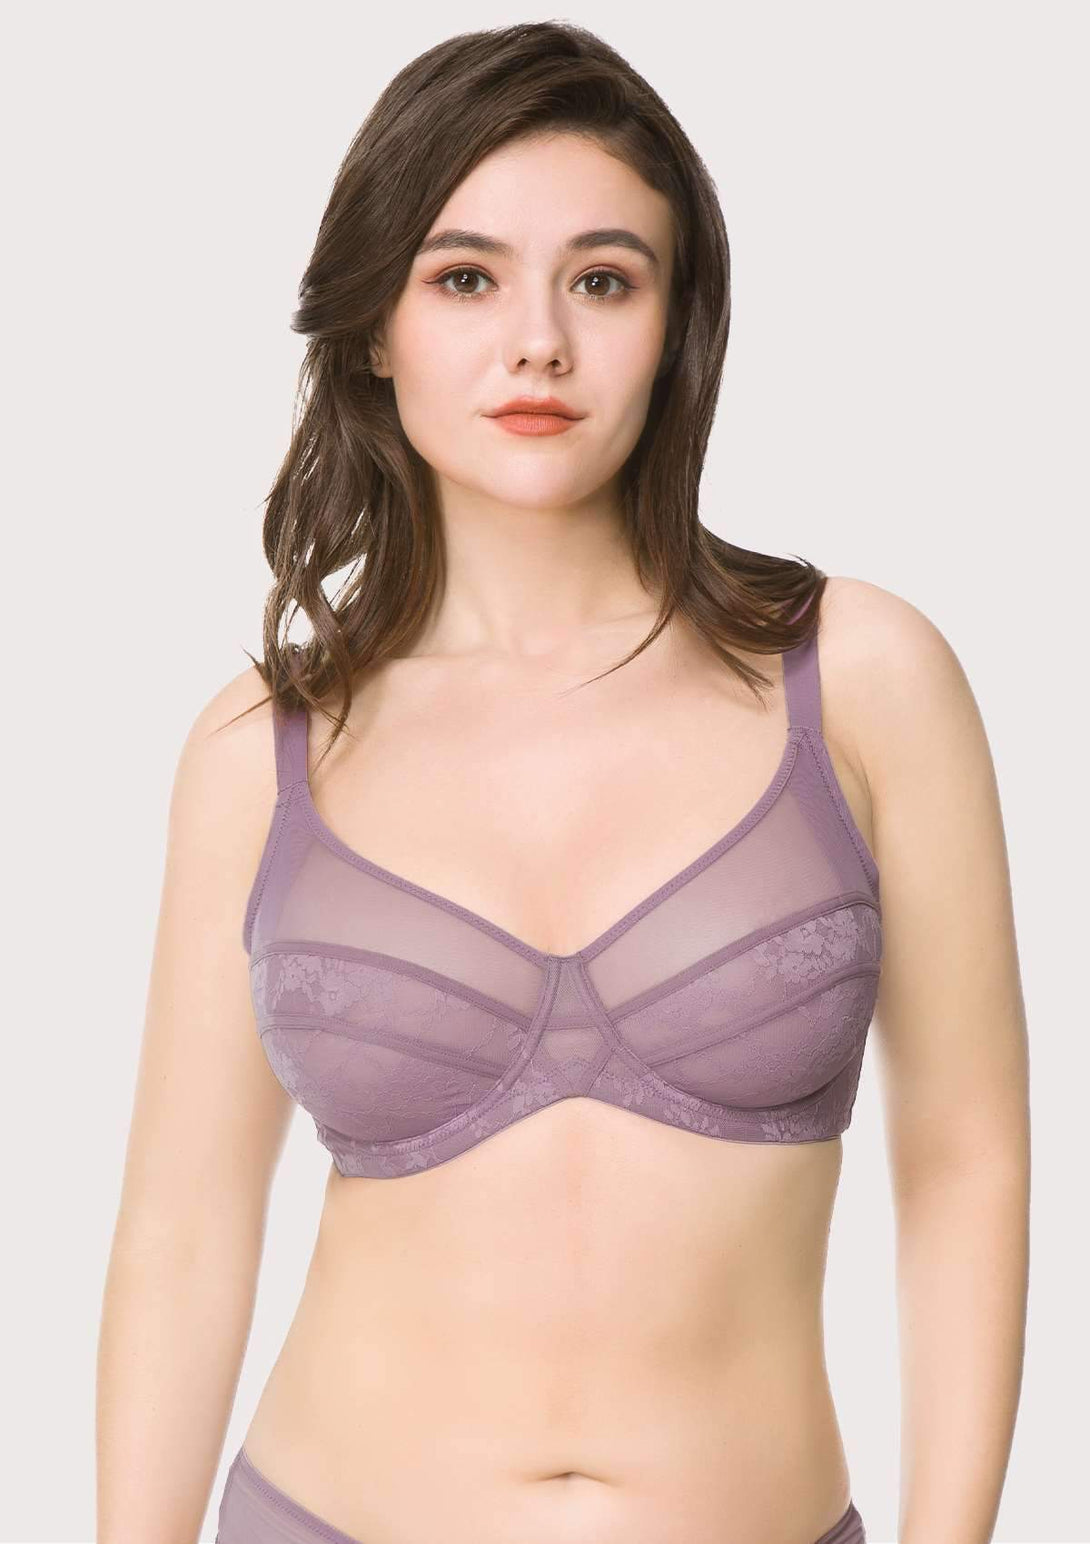 HSIA-EASTERBOGO Amour Sheer Lace Unlined Bra Purple / 34C